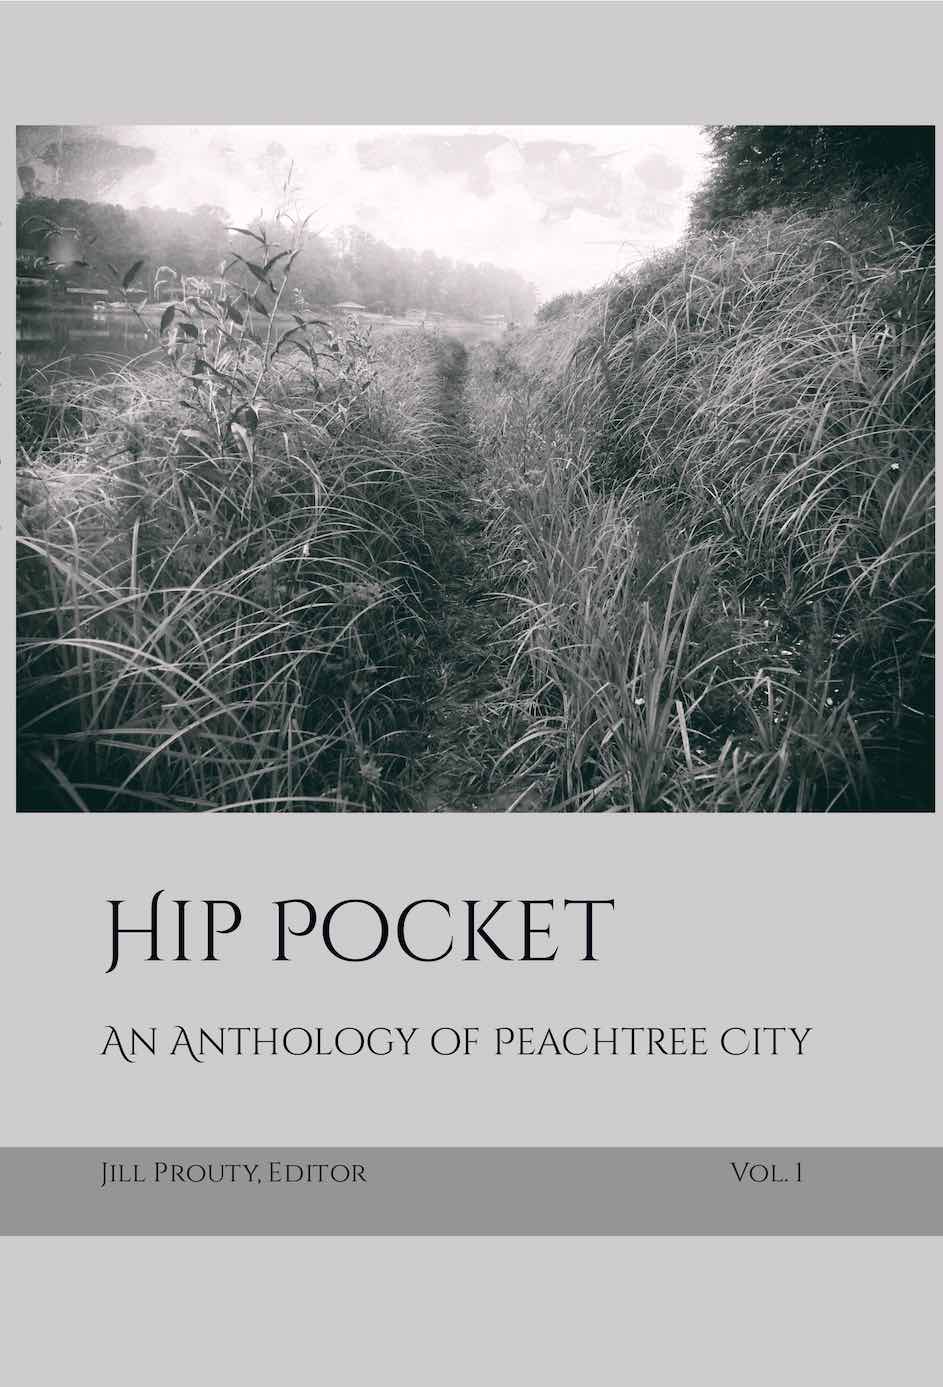 The cover of "Hip Pocket."